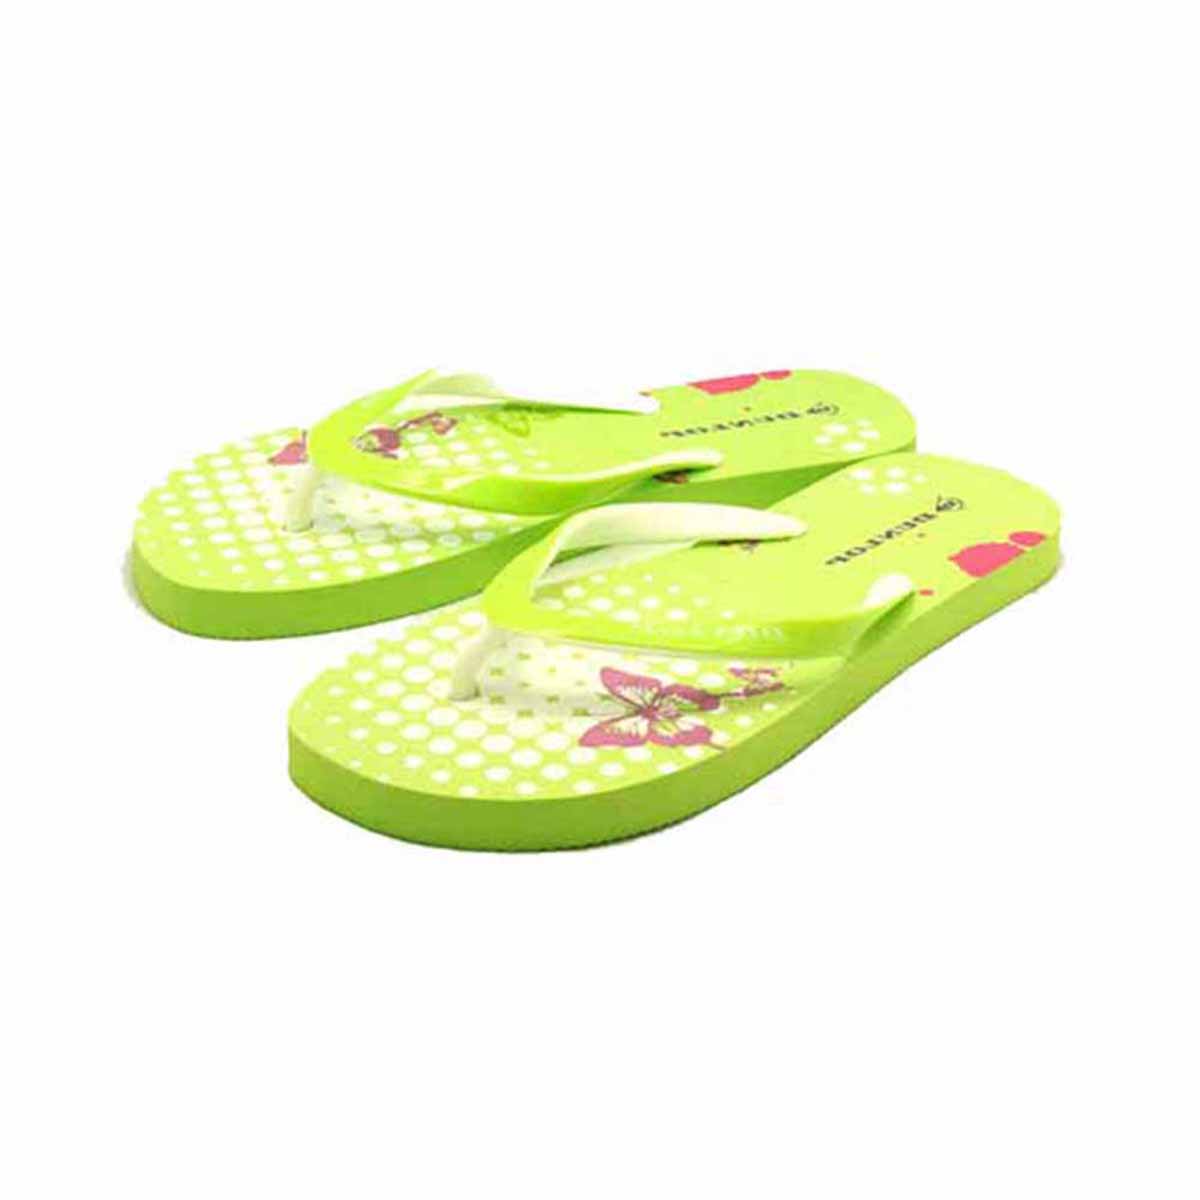 Bright Green Flip flops with butterfly pattern